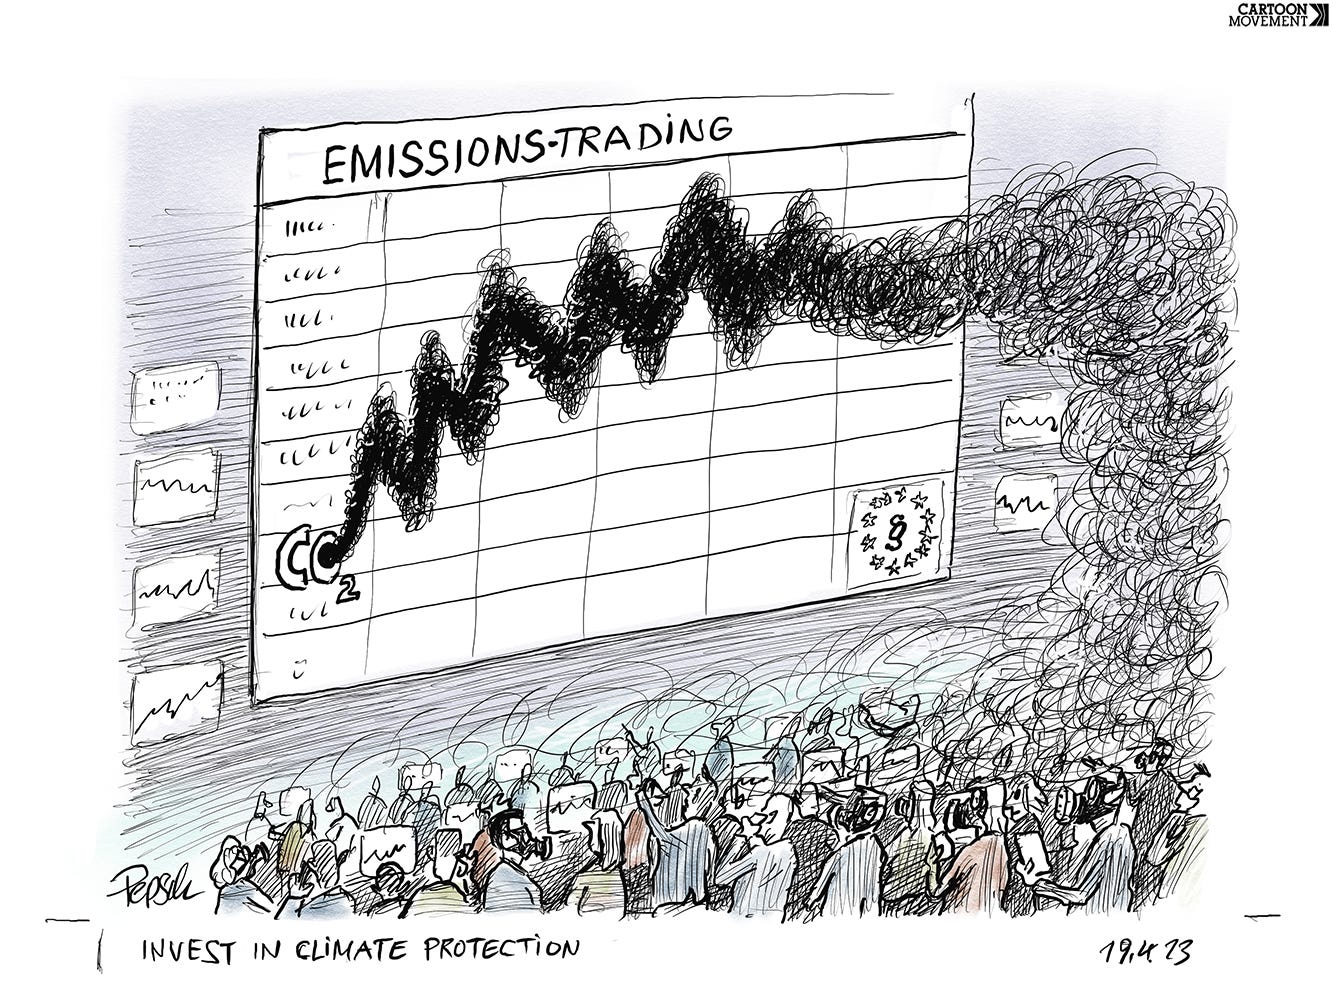 Cartoon showing a trading floor with many clamouring people with a big graph on the wall titled 'Emissions trading'. Instead of a traditional graph line, the line is made op of dirty black smoke. The caption reads "Invest in climate protection".